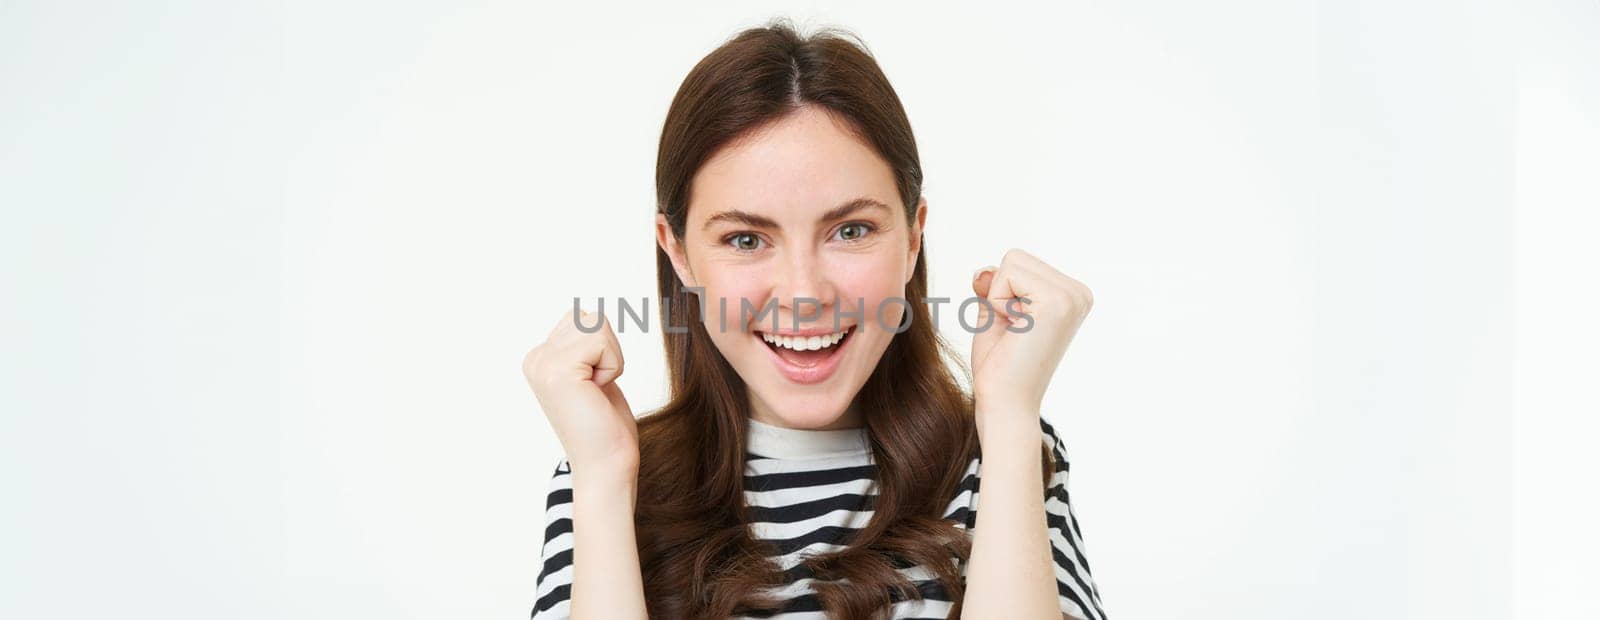 Excited young woman celebrating, shaking hands and looking happy, emotion of winning, triumphing, isolated on white background.